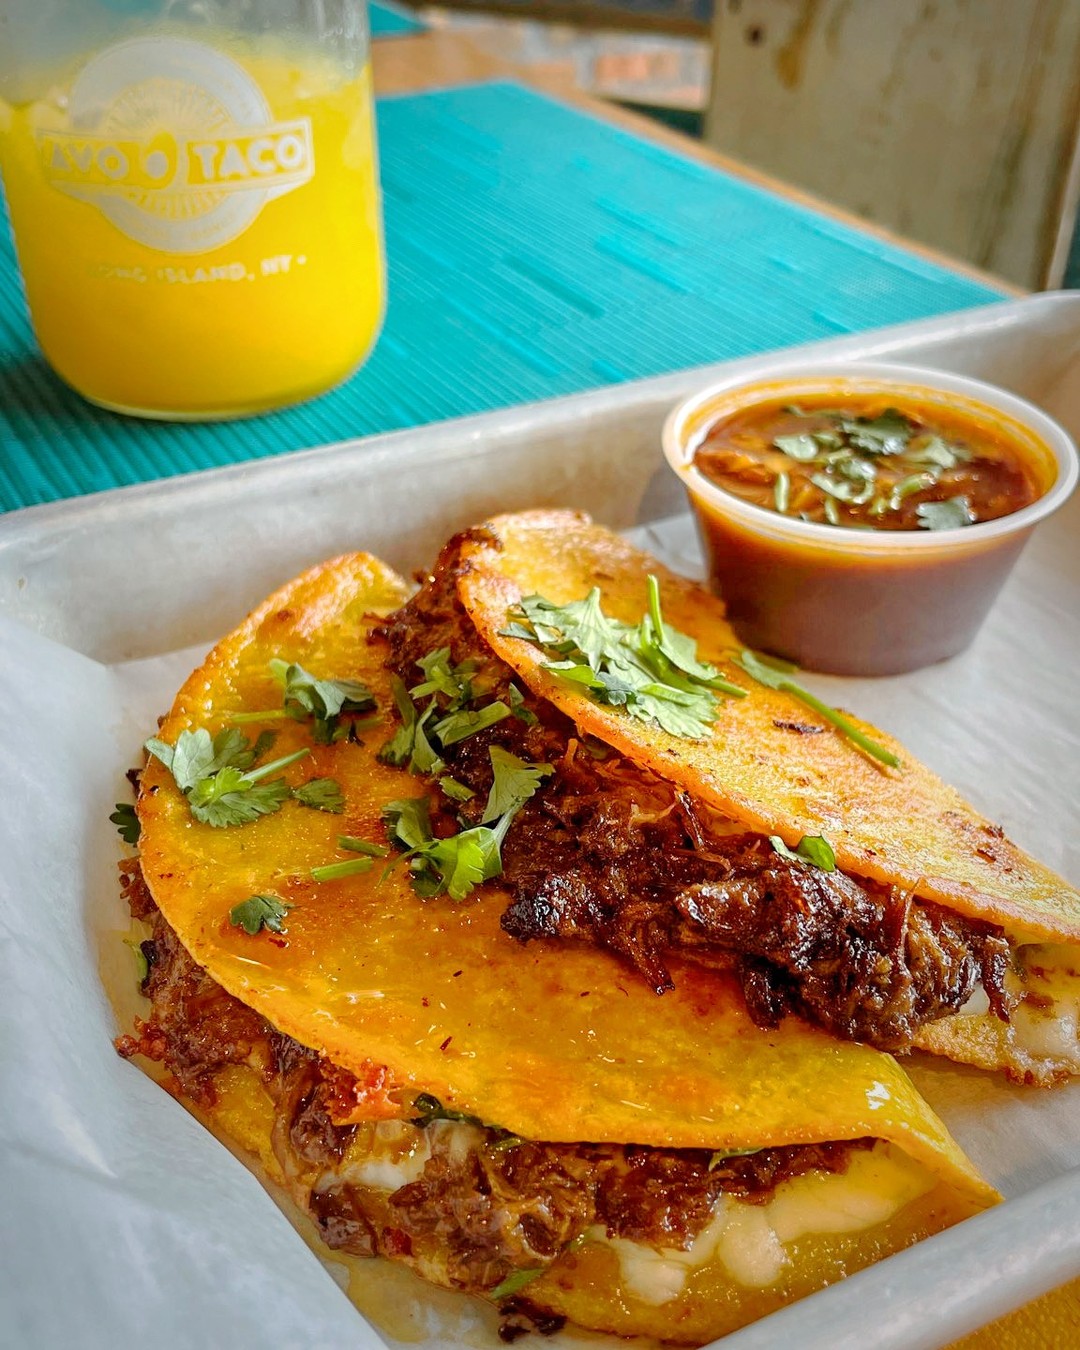 Need to brighten your day? Our Dos Birria Tacos are on the menu and packed with flavor! We slow roast our beef, then grill the tortilla, which gets topped with jack cheese and until melted. It all comes together beautifully, then it gets topped with cilantro. Served with a rich consommé and paired with one of our fresh squeezed cocktails, you'll be singing its praises to everyone you know.
#birria #birriatacos #tacos #lifoodie #foodexperience #gardencityny #newhydepark #nyeats #queensfoodie #nassaucounty  #foodscene #tacoparty #tacosarelife #beeftacos 
Available in New Hyde Park only. Not available on Tuesdays.